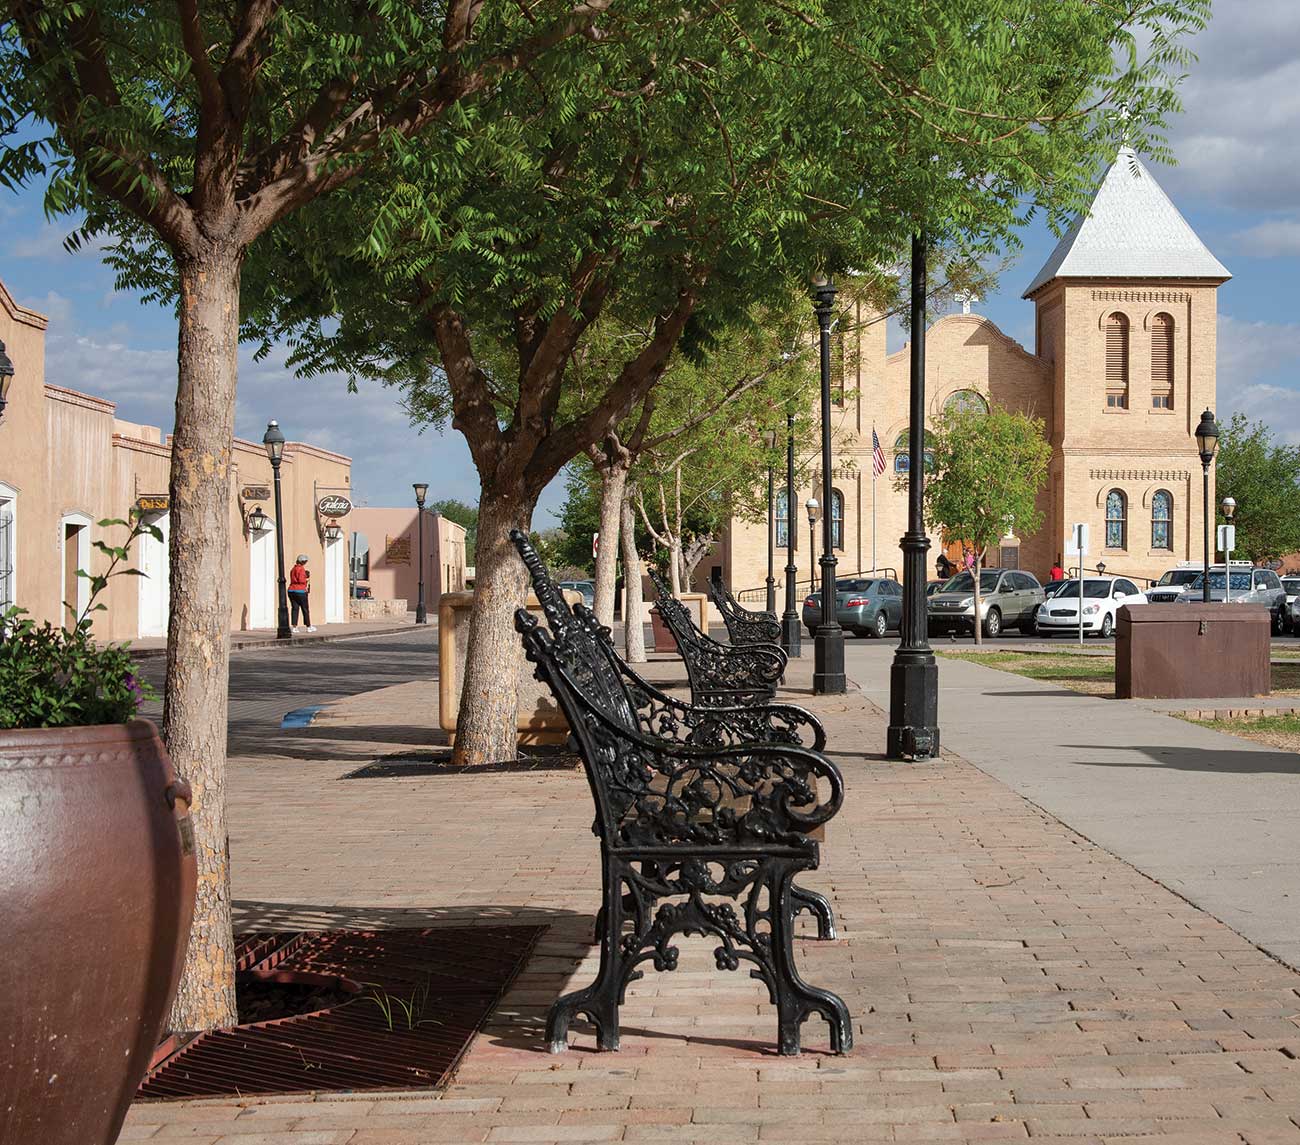 A view of the Mesilla Plaza with a bench, trees, and historic basilica.